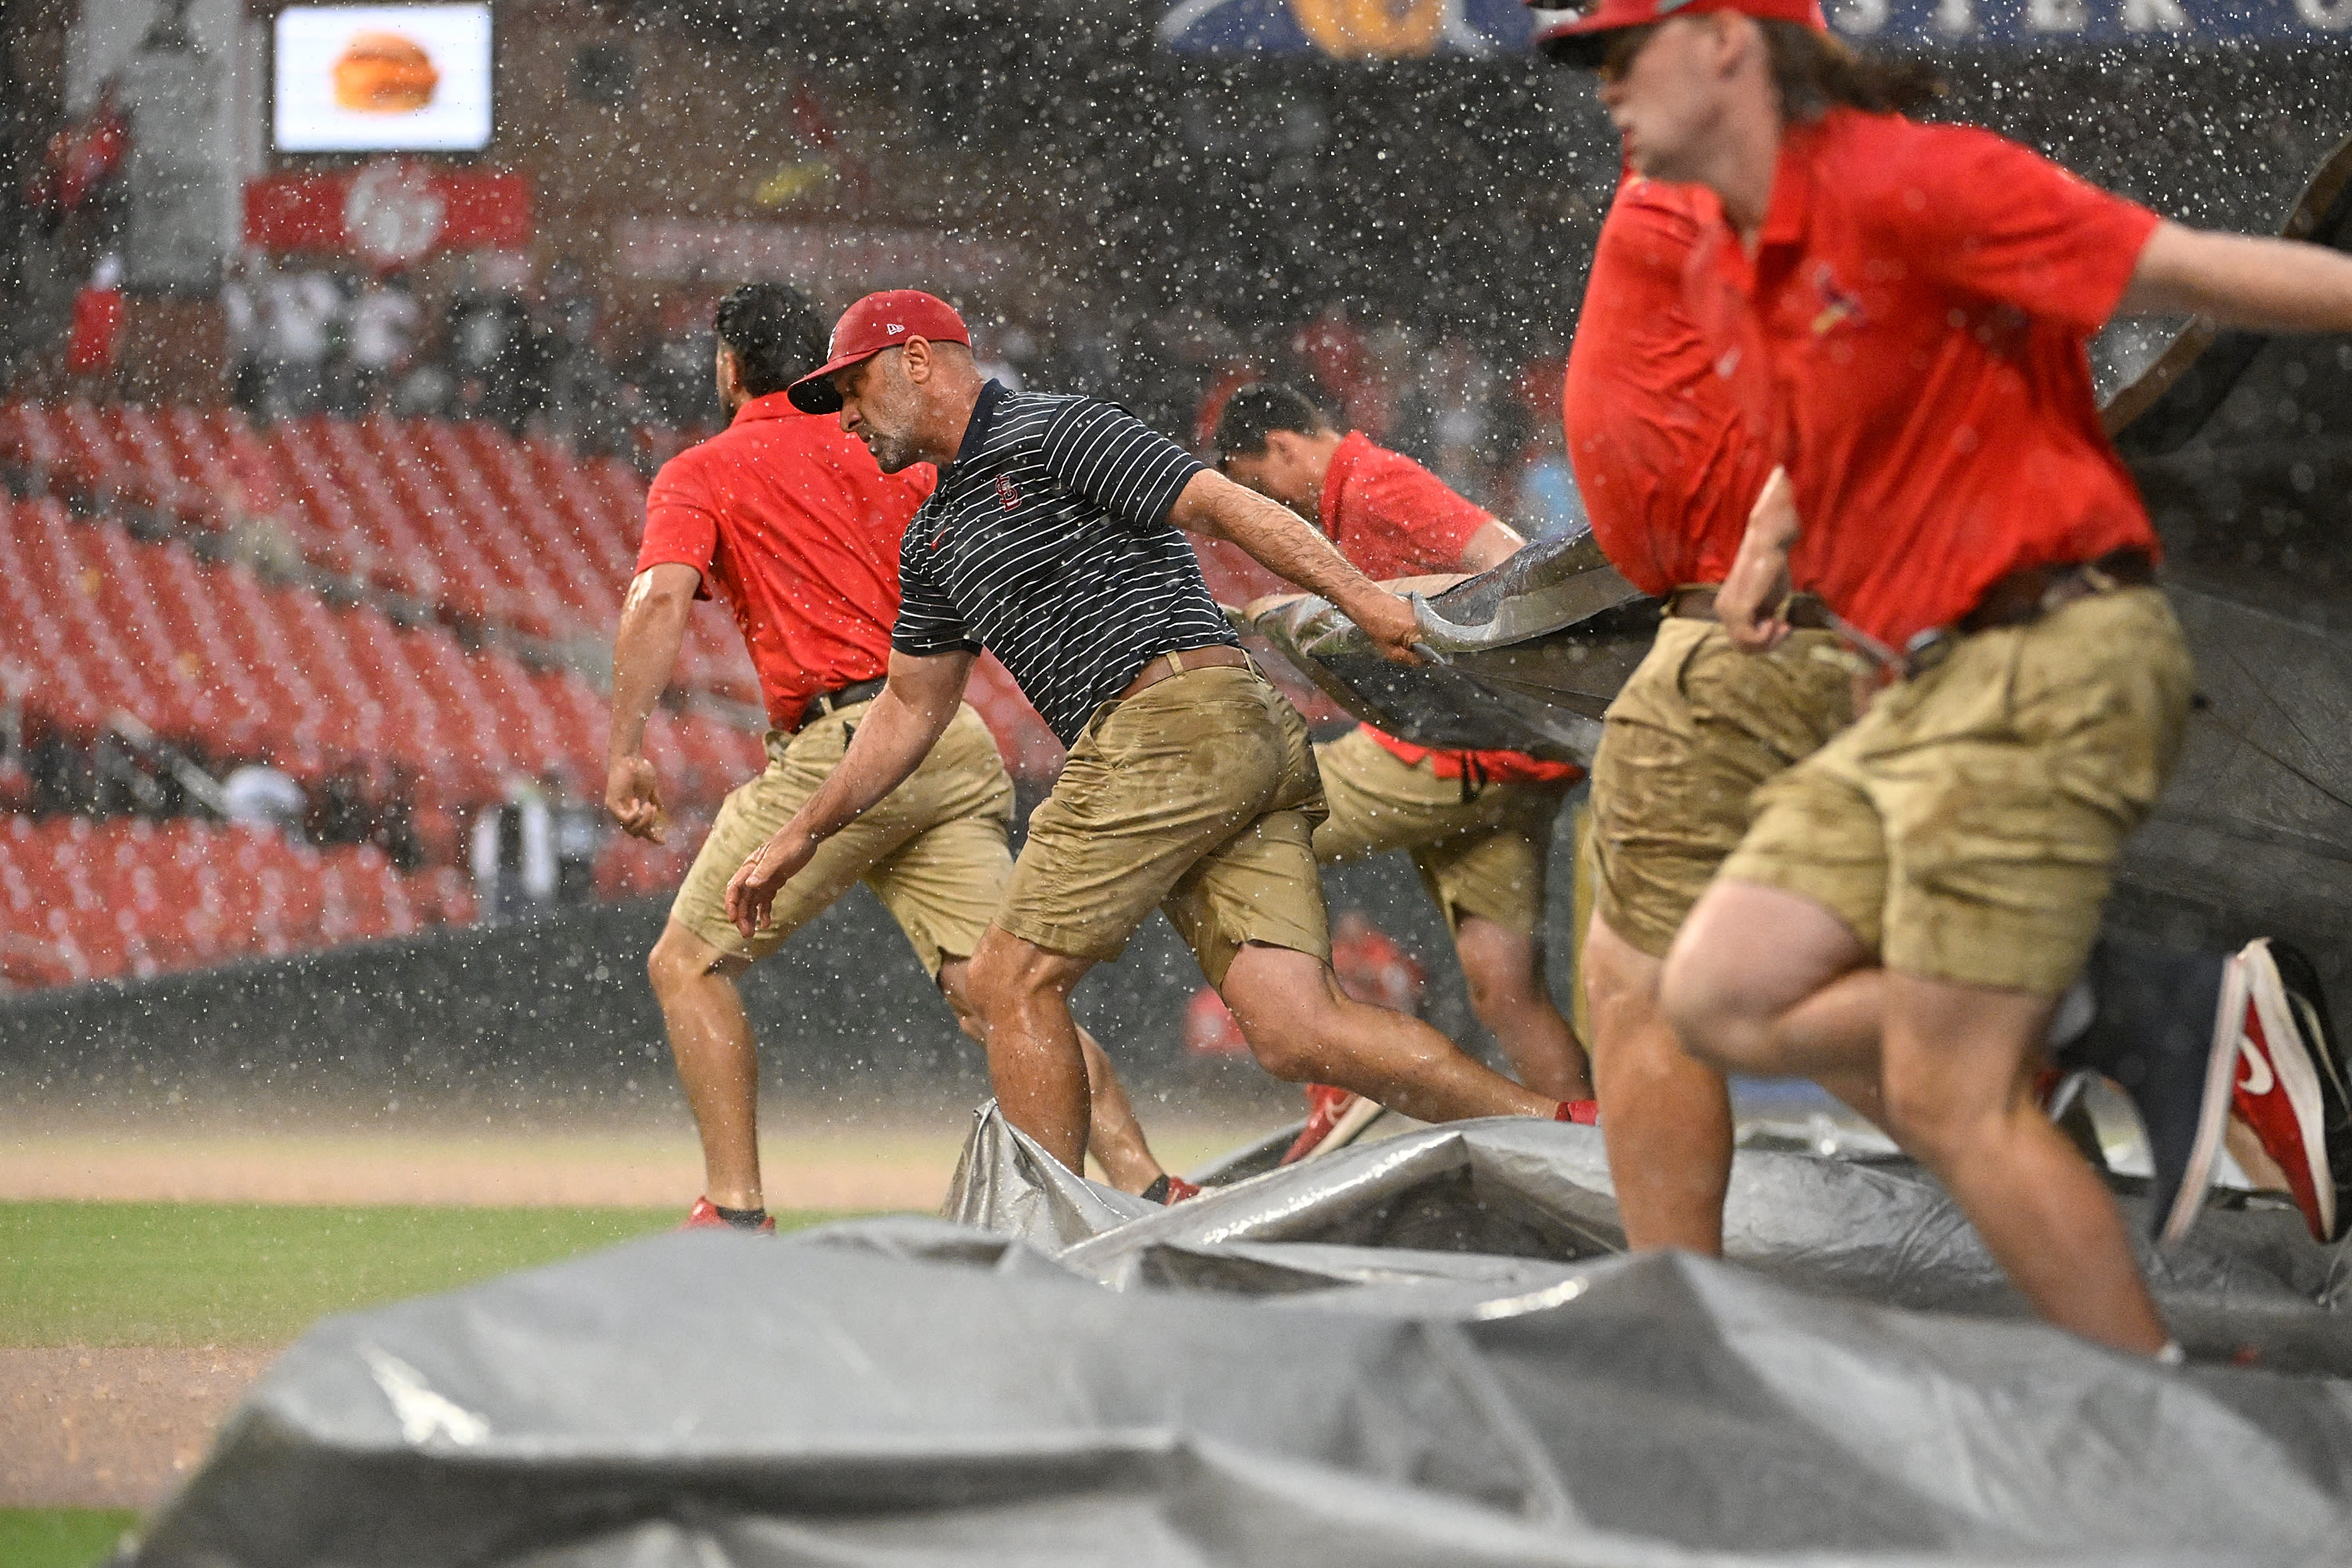 WATCH: White Sox return from rain delay on the cusp of victory